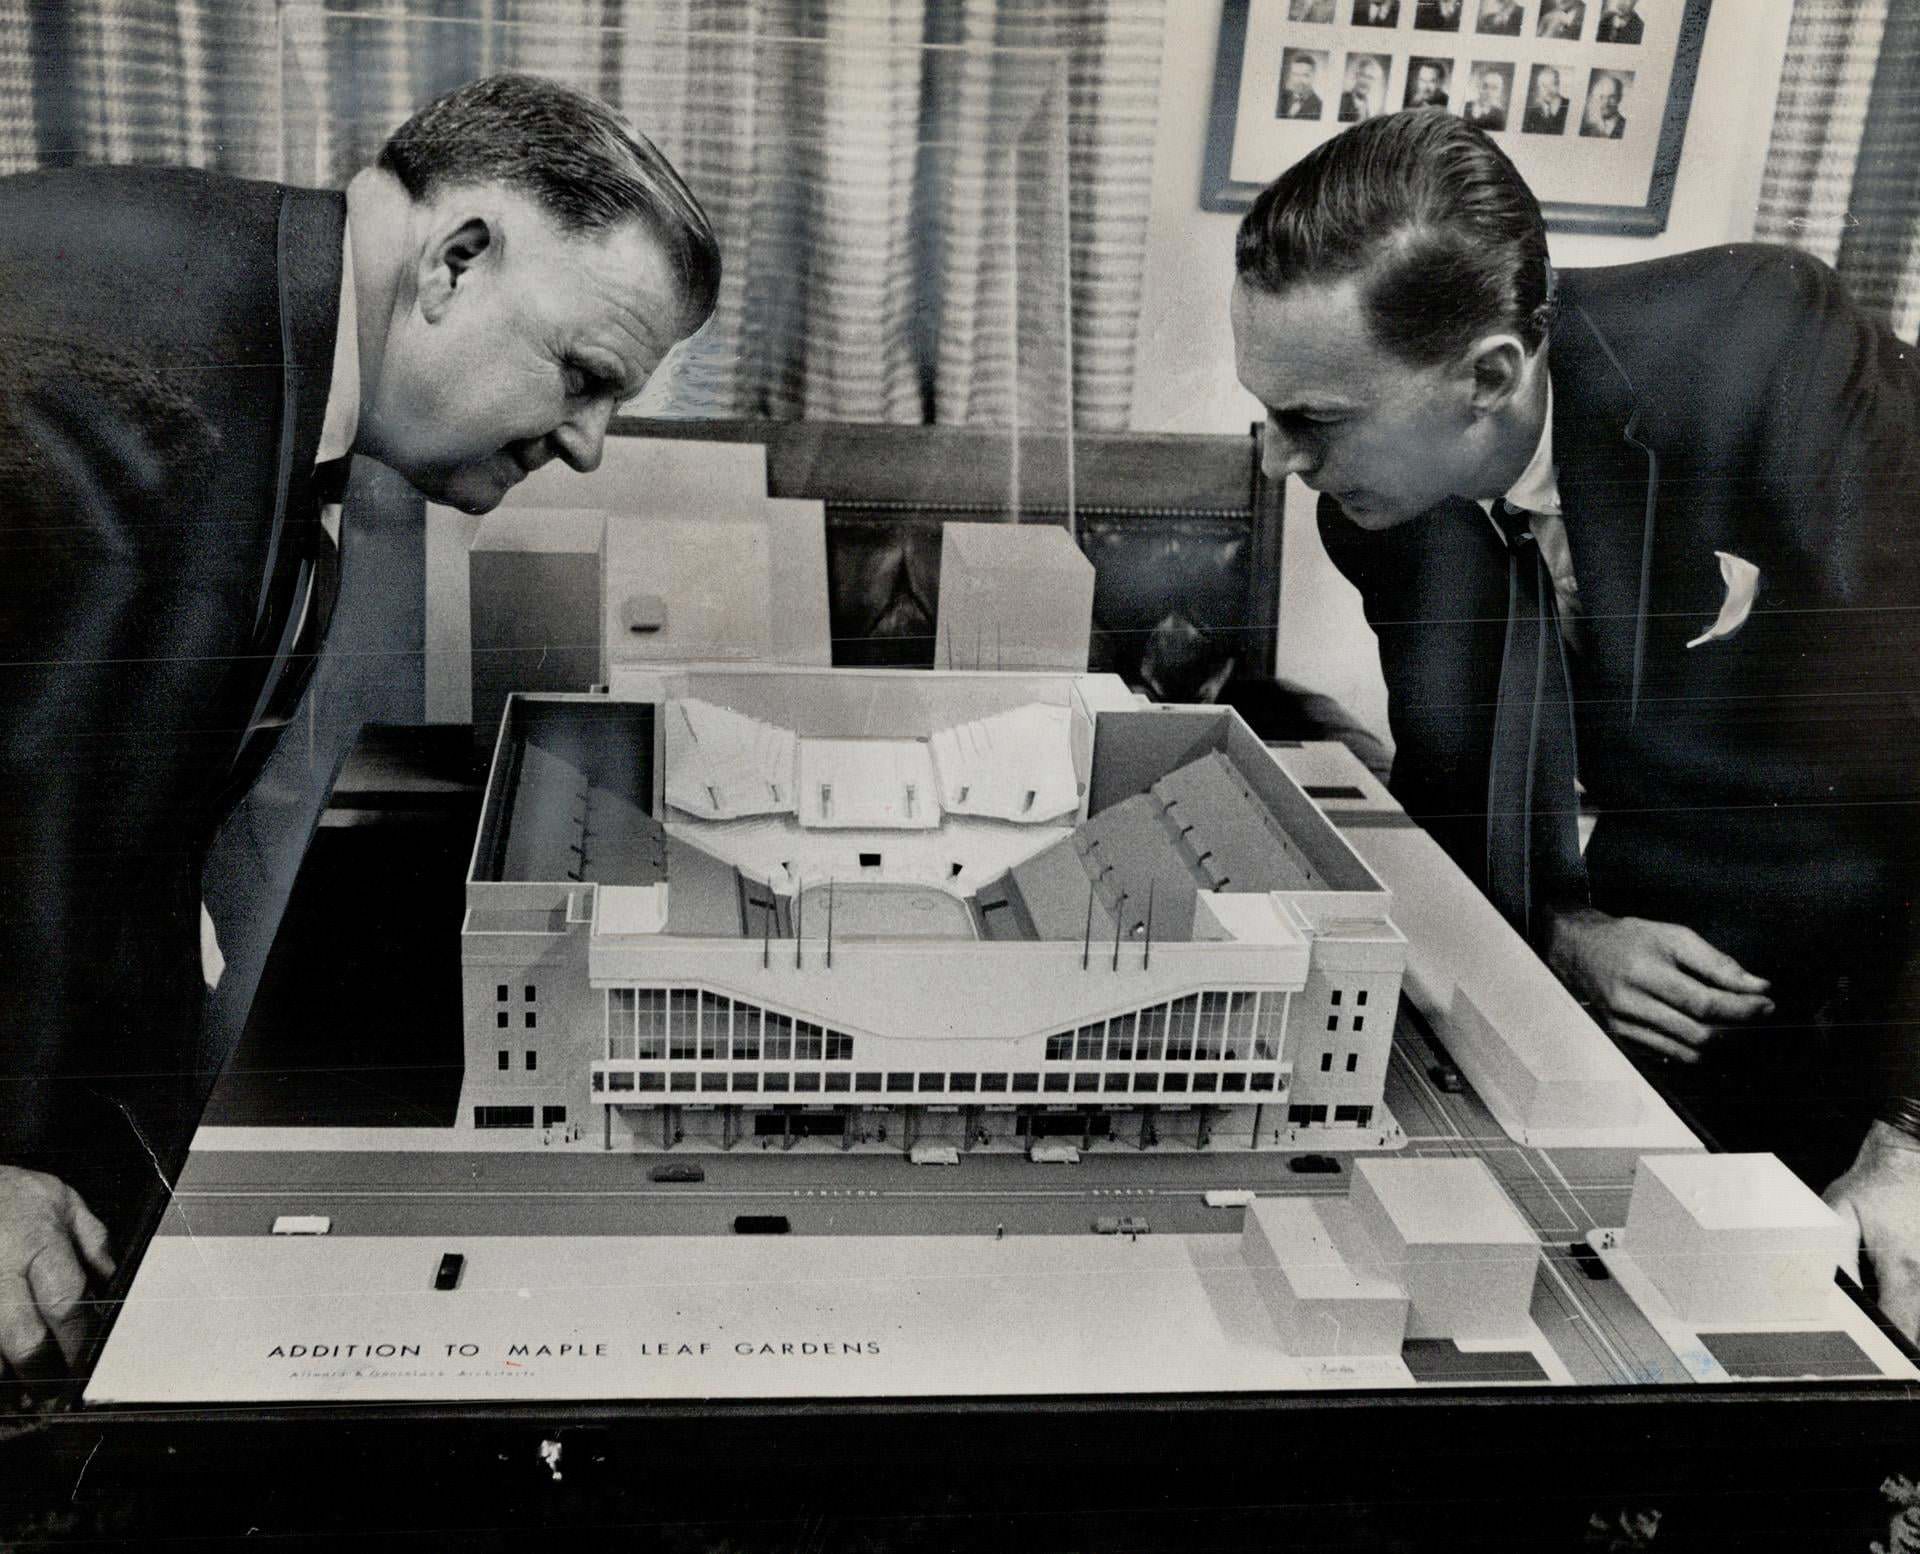 Maple leaf gardens' extension over street line on Wood and Carlton Sts.; to add 4;000 seats; was approved by city works committee yesterday. Looking at model are Gardens' vice-president H. Ballard; architect P. Allward, 1963